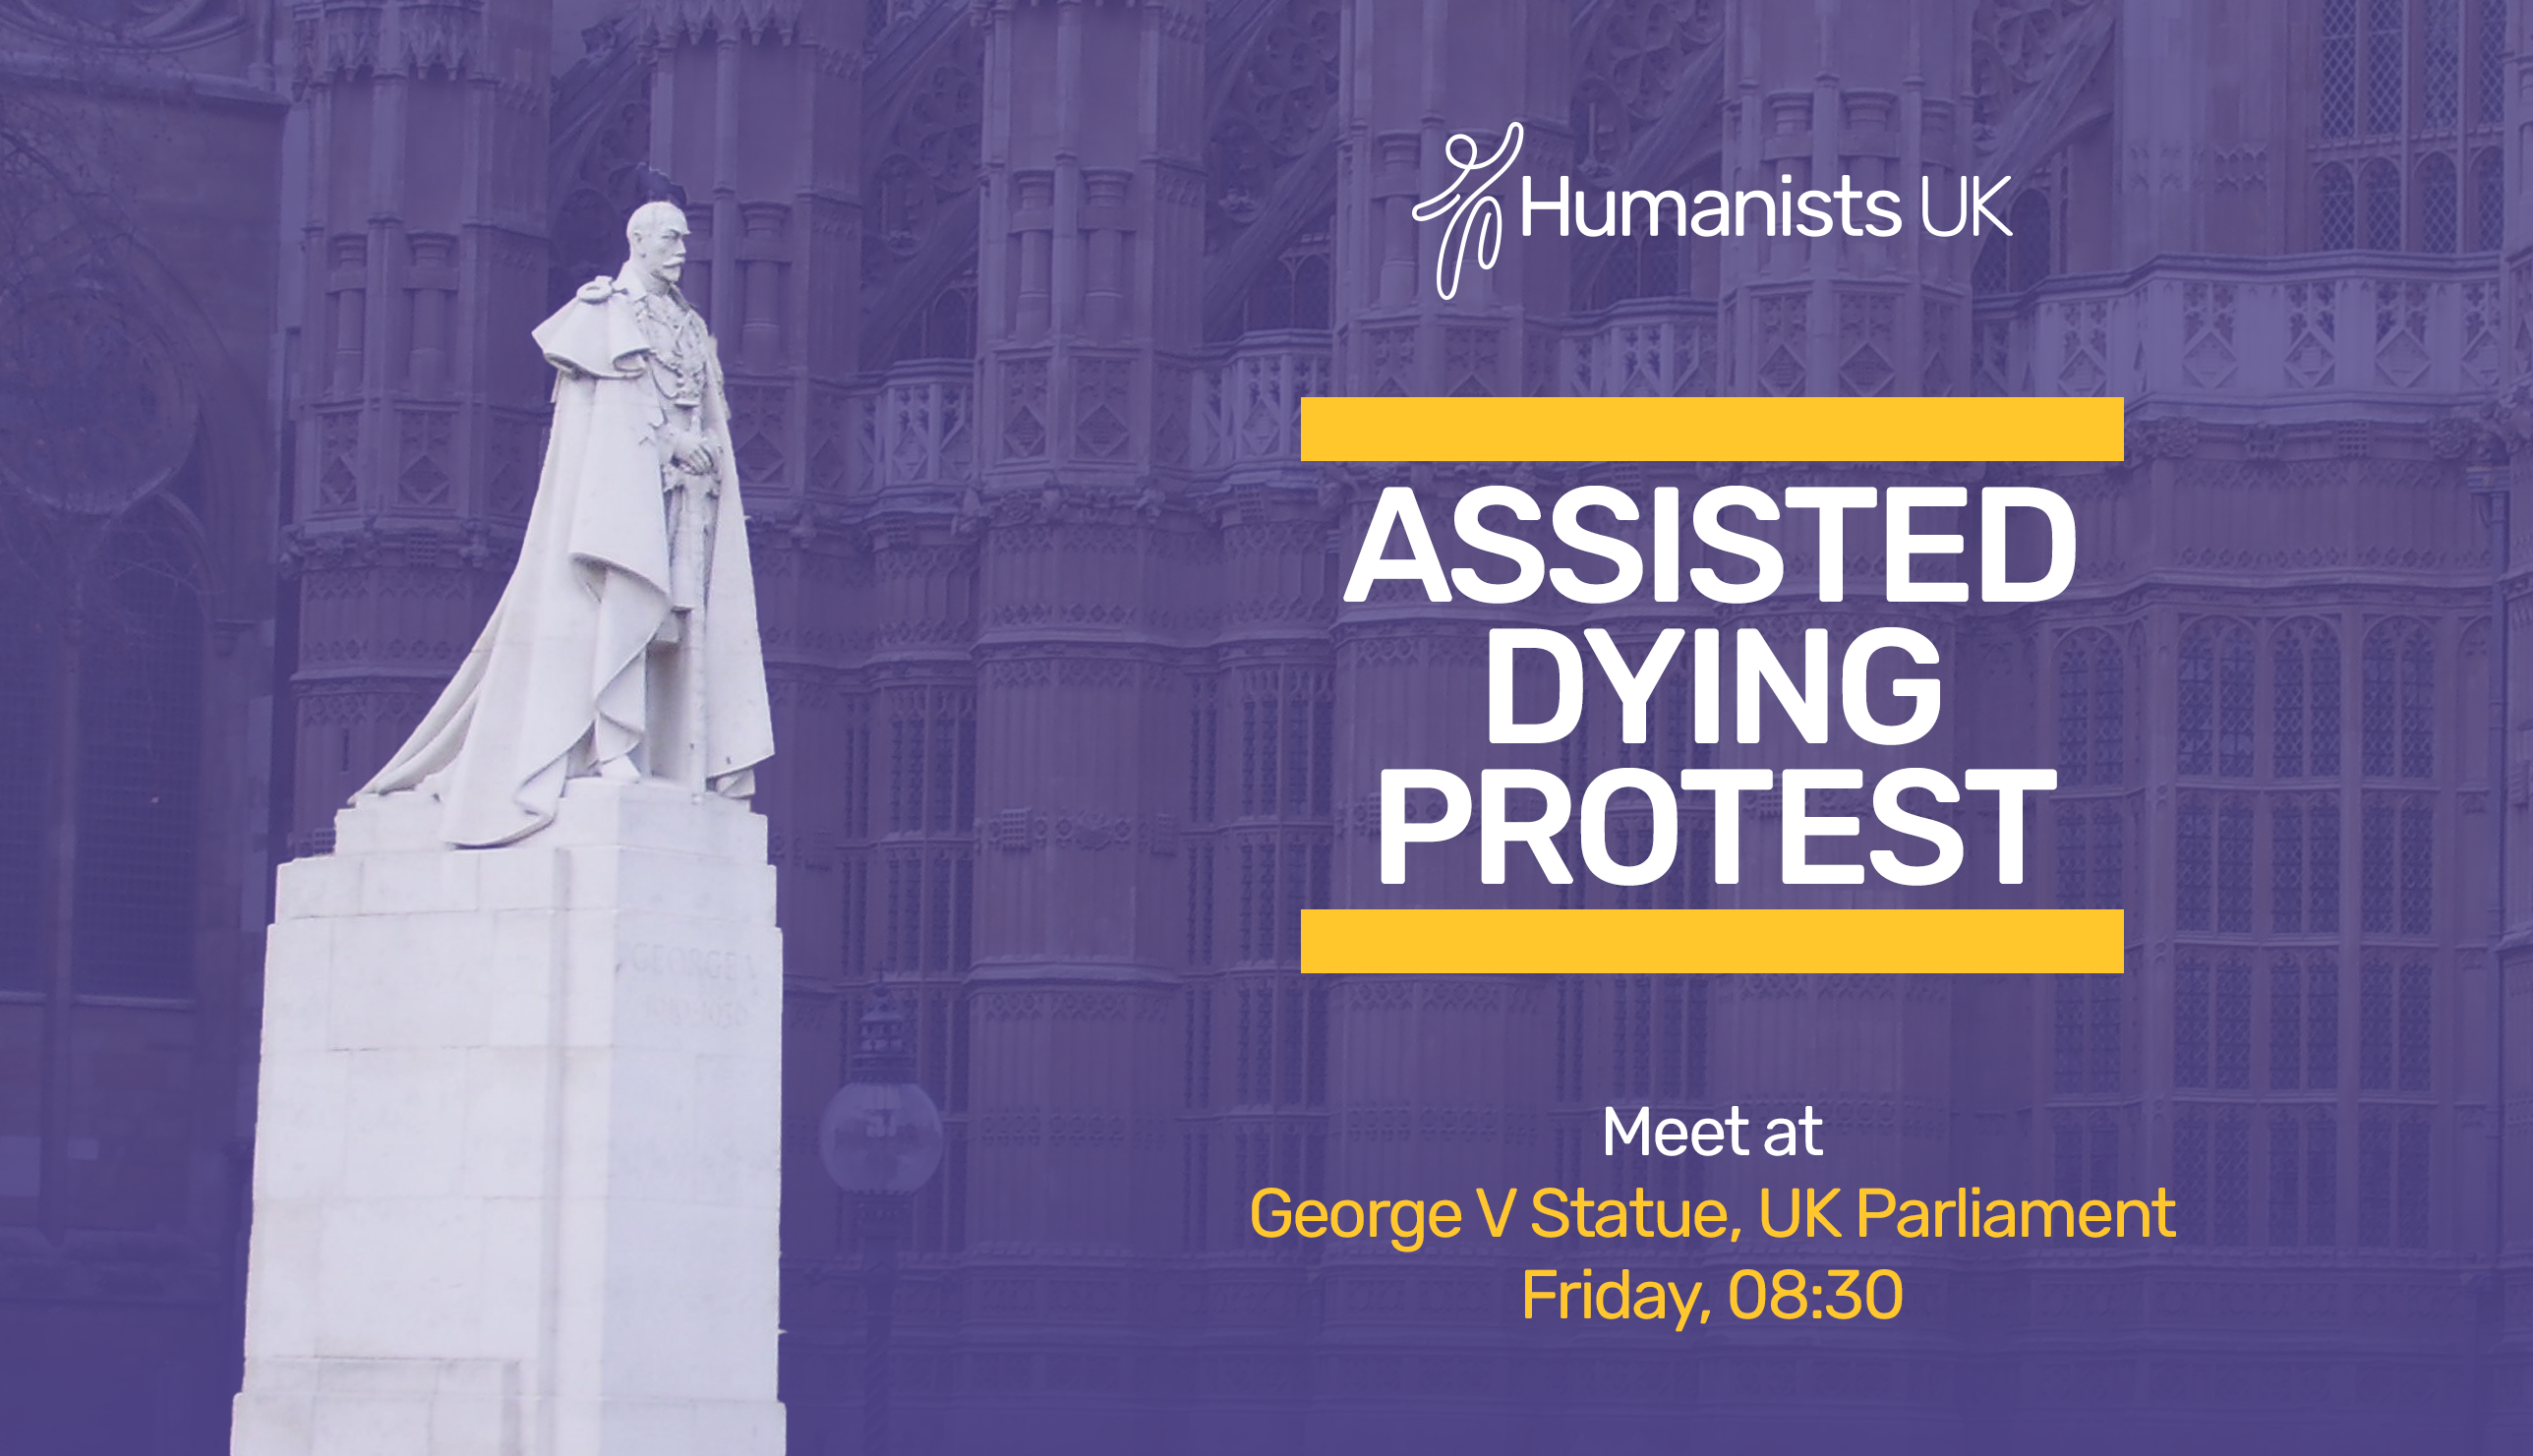 Image event banner featuring photo of George V Statue